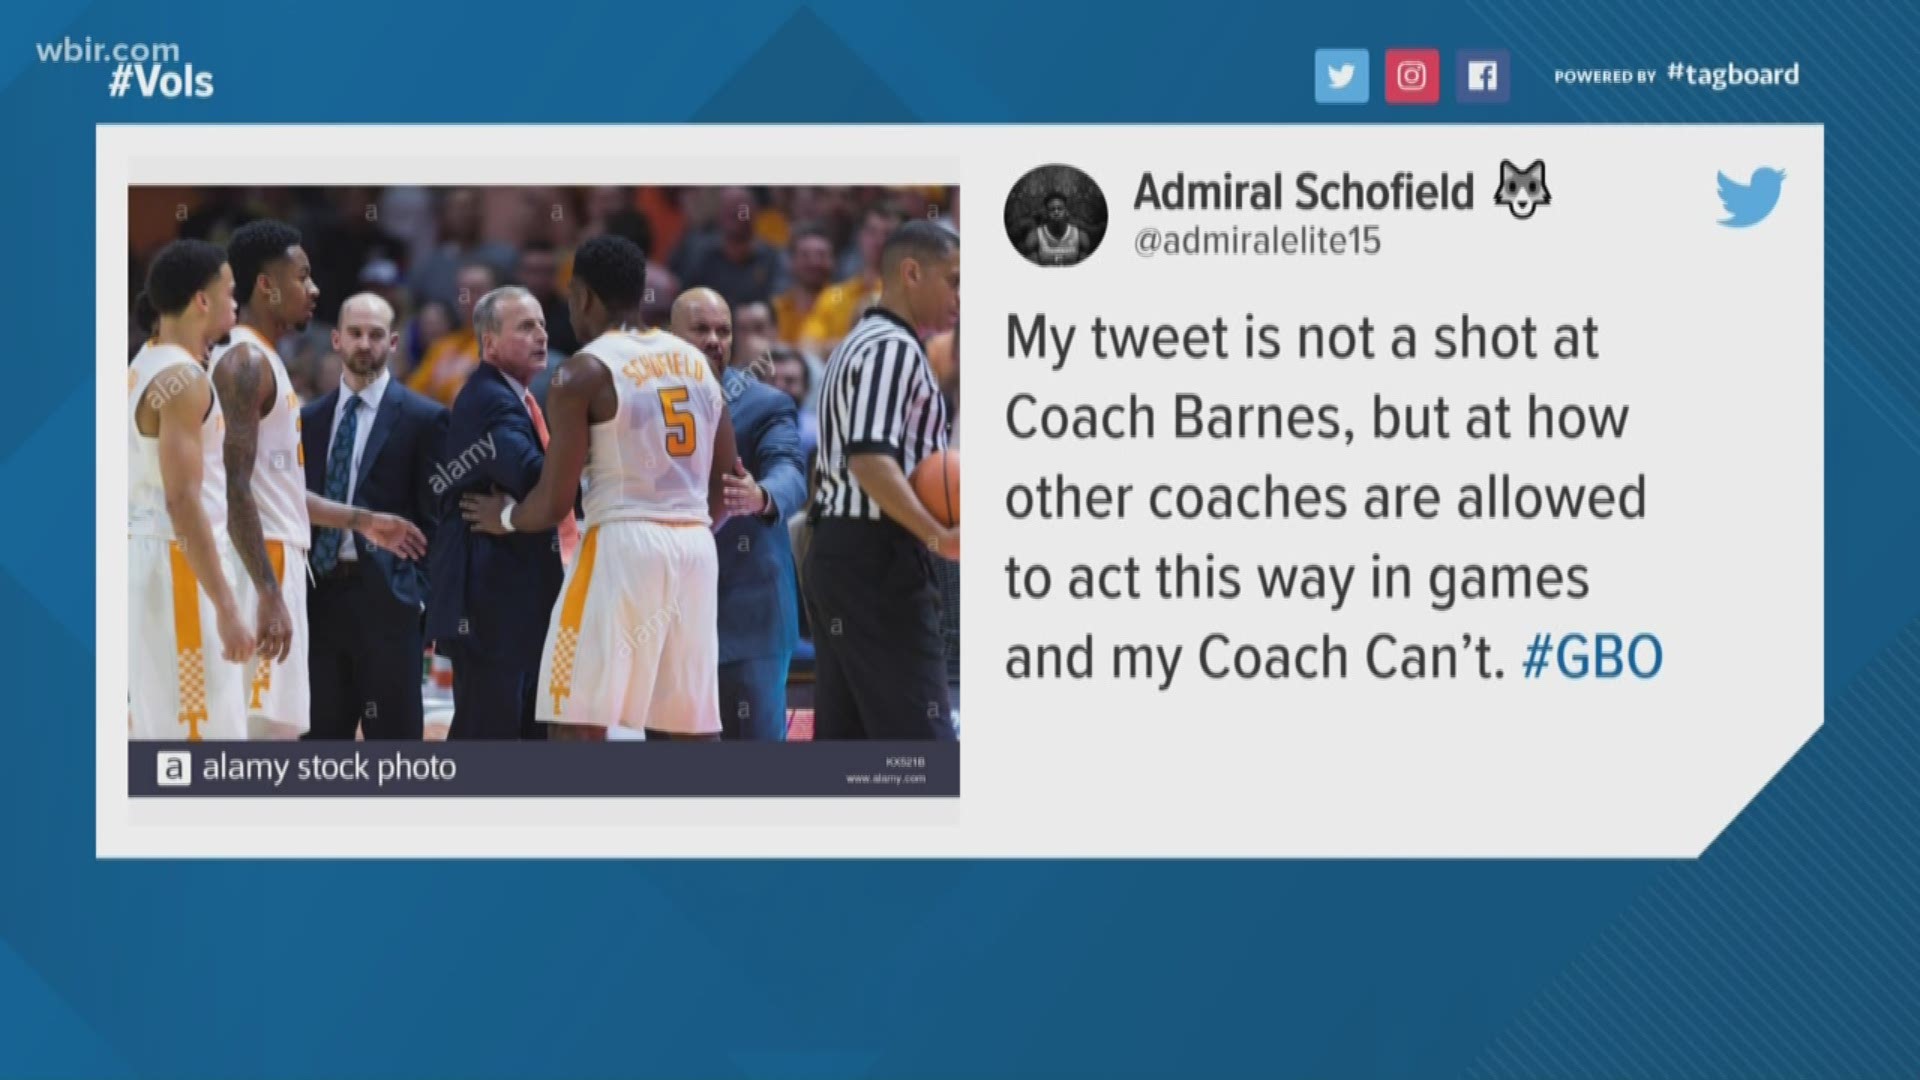 Schofield tweeted this earlier this morning, "My tweet is not a shot at Coach Barnes, but at how other coaches are allowed to act this way in games and my Coach Can't #GBO"